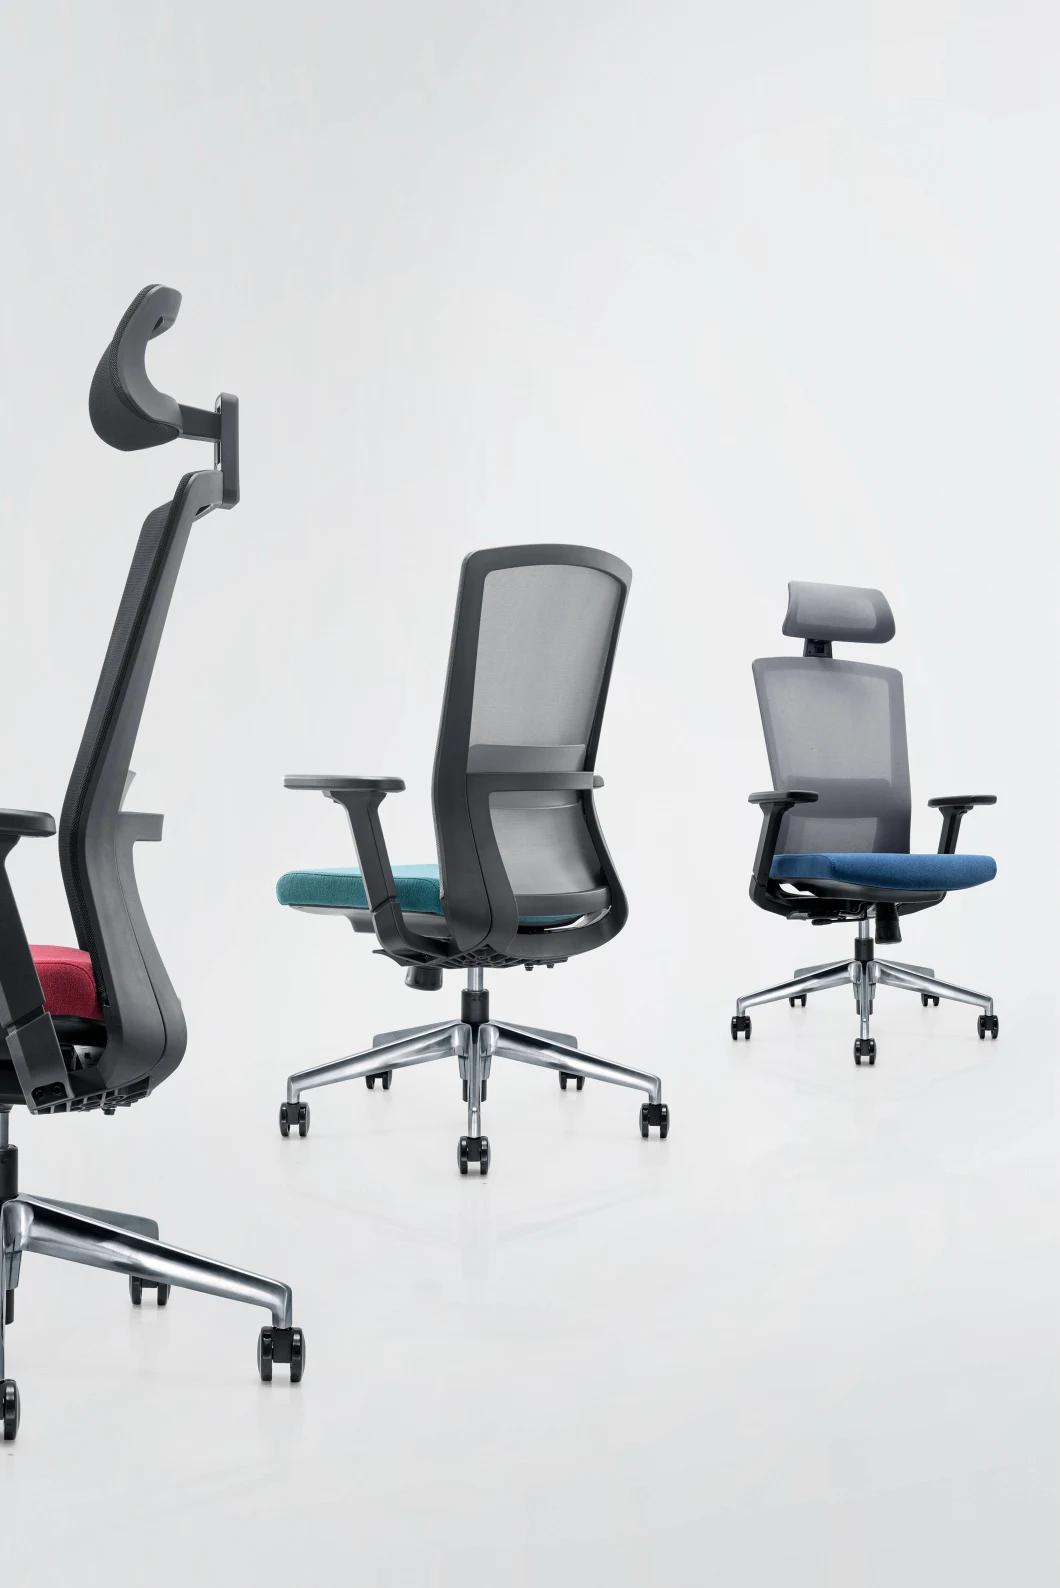 with Armrest Foshan Plastic Ergonomic Wholesale Chairs Folding Office Chair Good Price